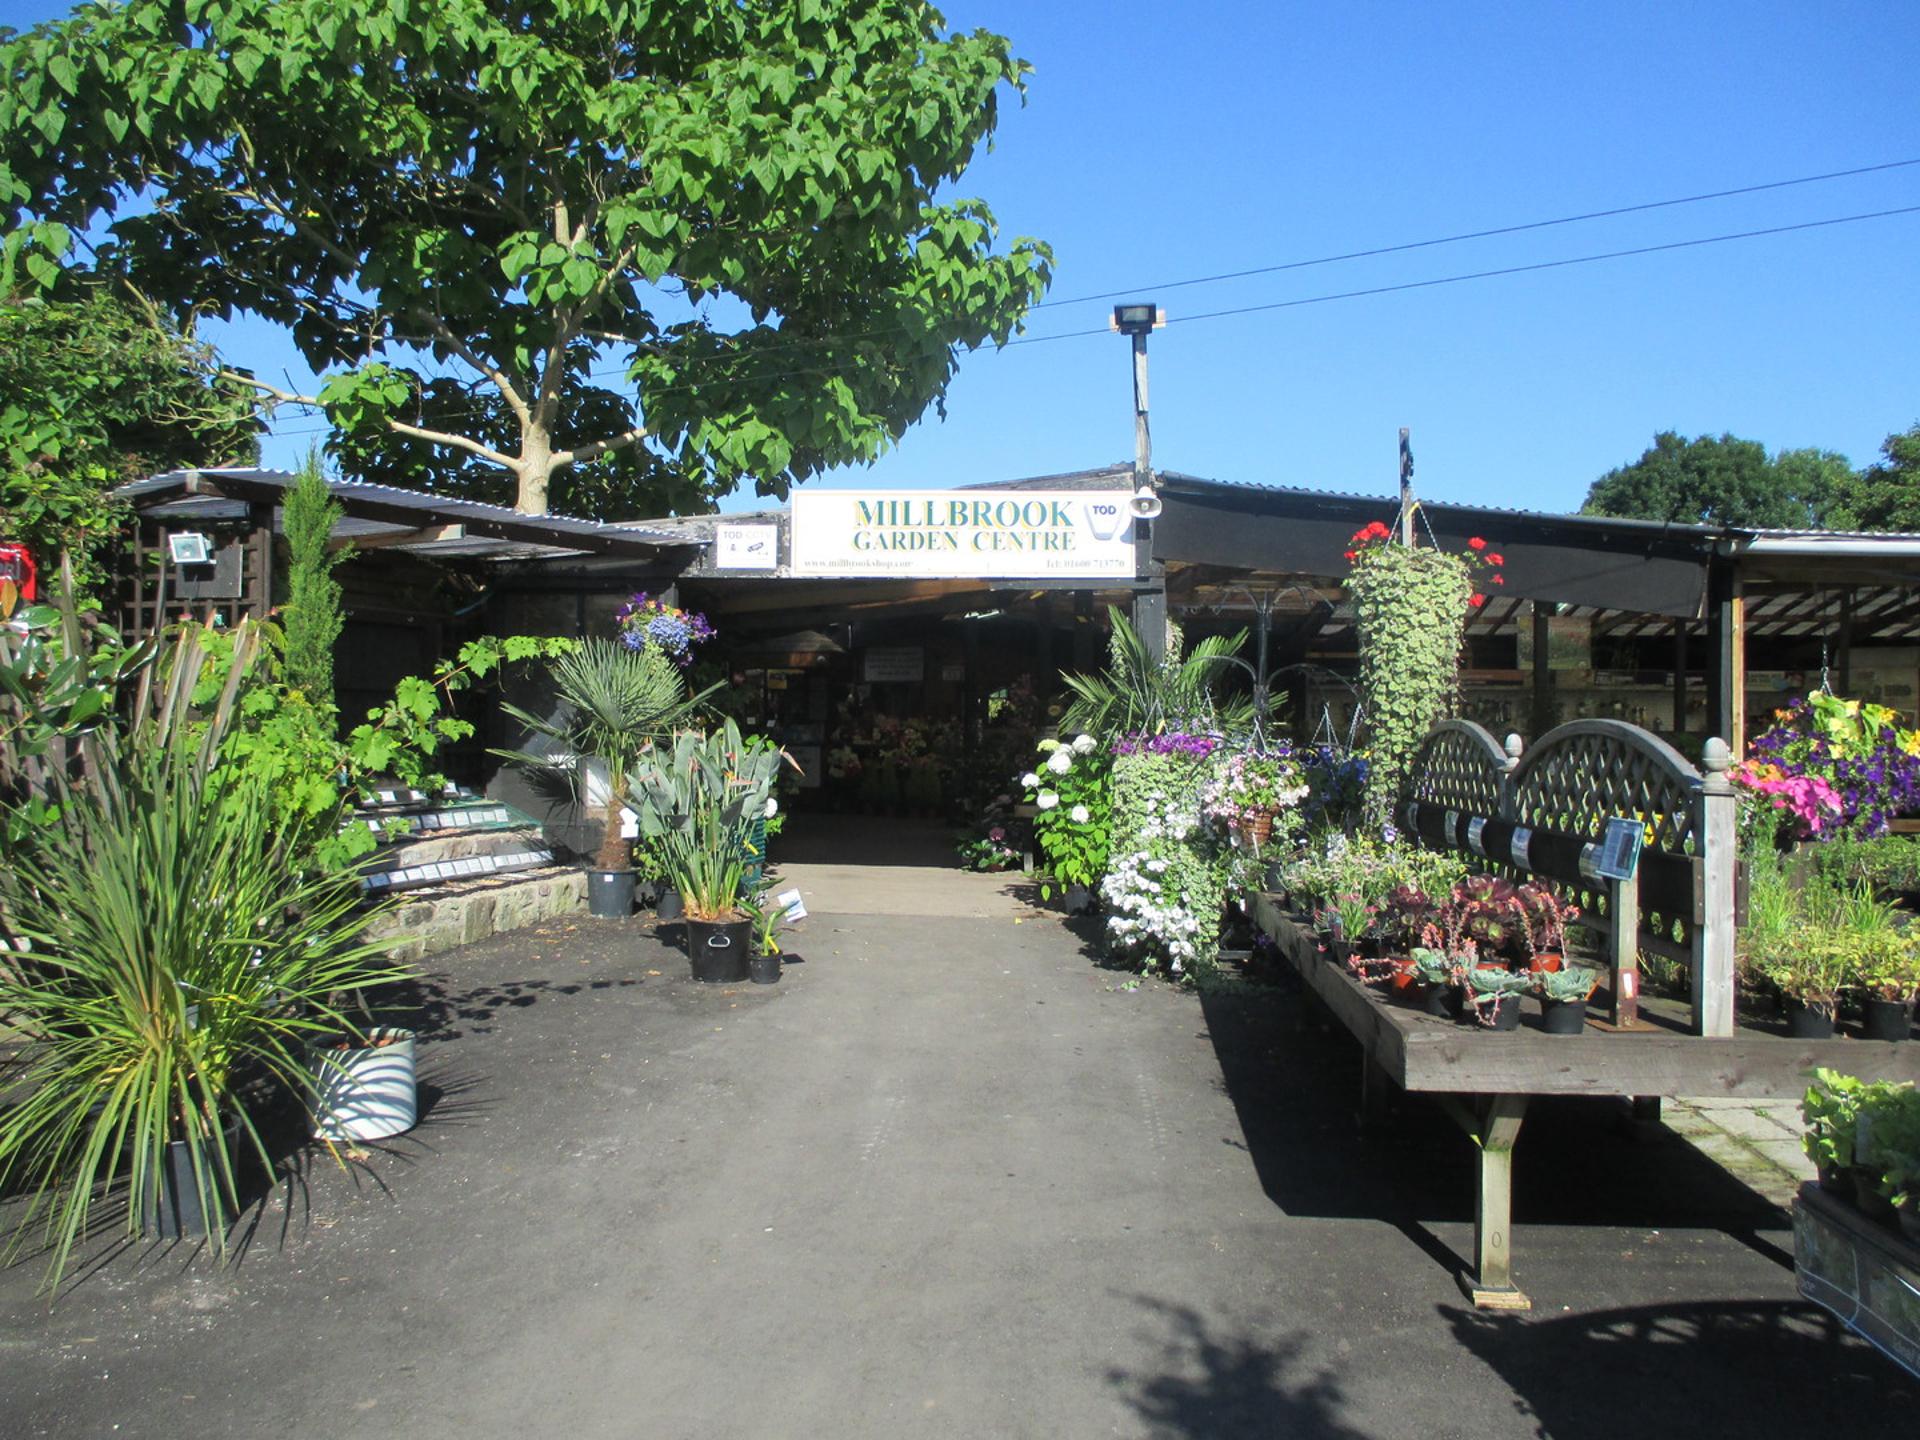 South Wales garden centre put up for sale